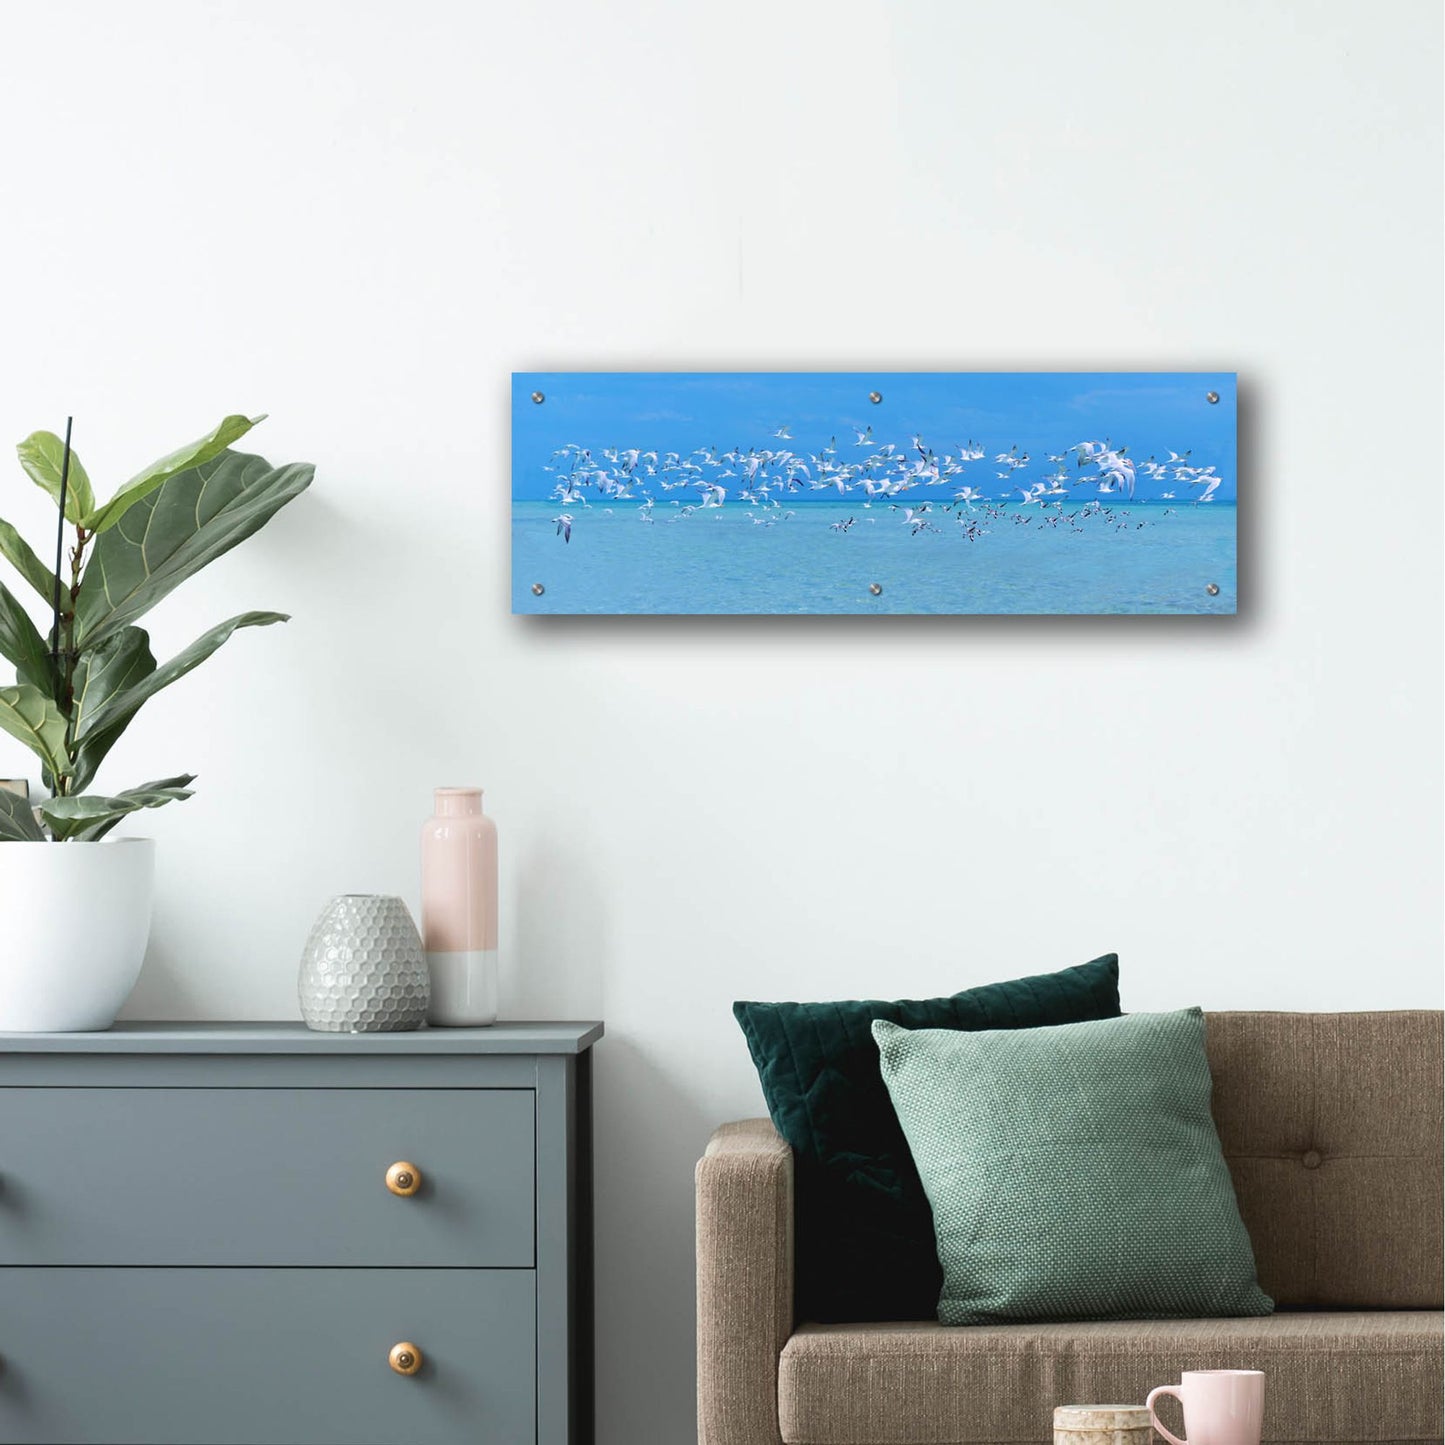 Epic Art ' Sugarlife Seabirds' by Jack Reed, Acrylic Glass Wall Art,36x12